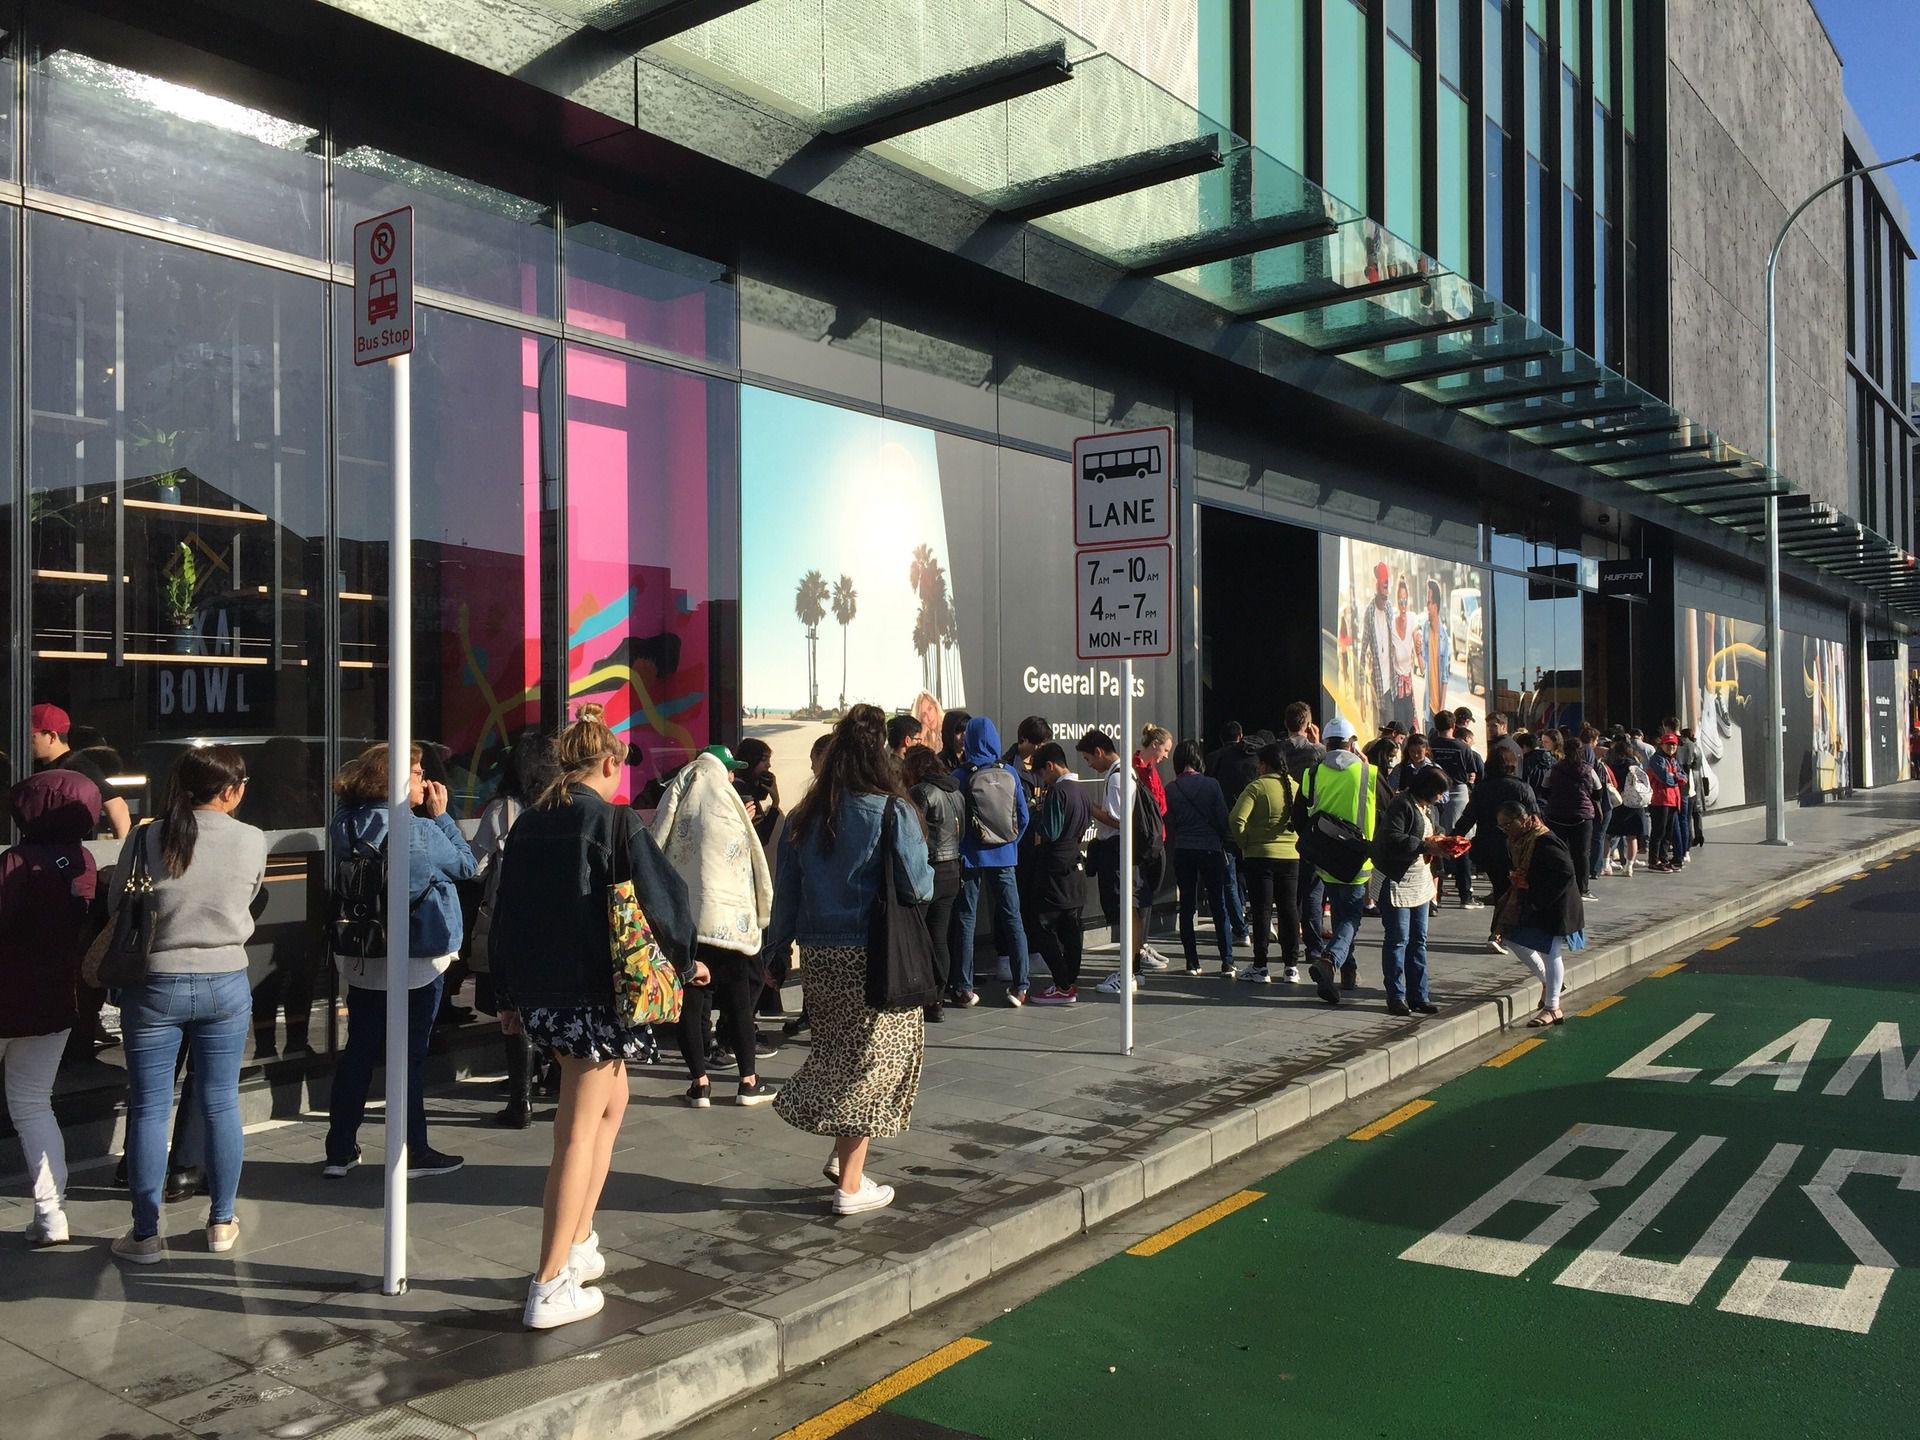 AJE ATHLETICA opens first New Zealand store at Westfield Newmarket